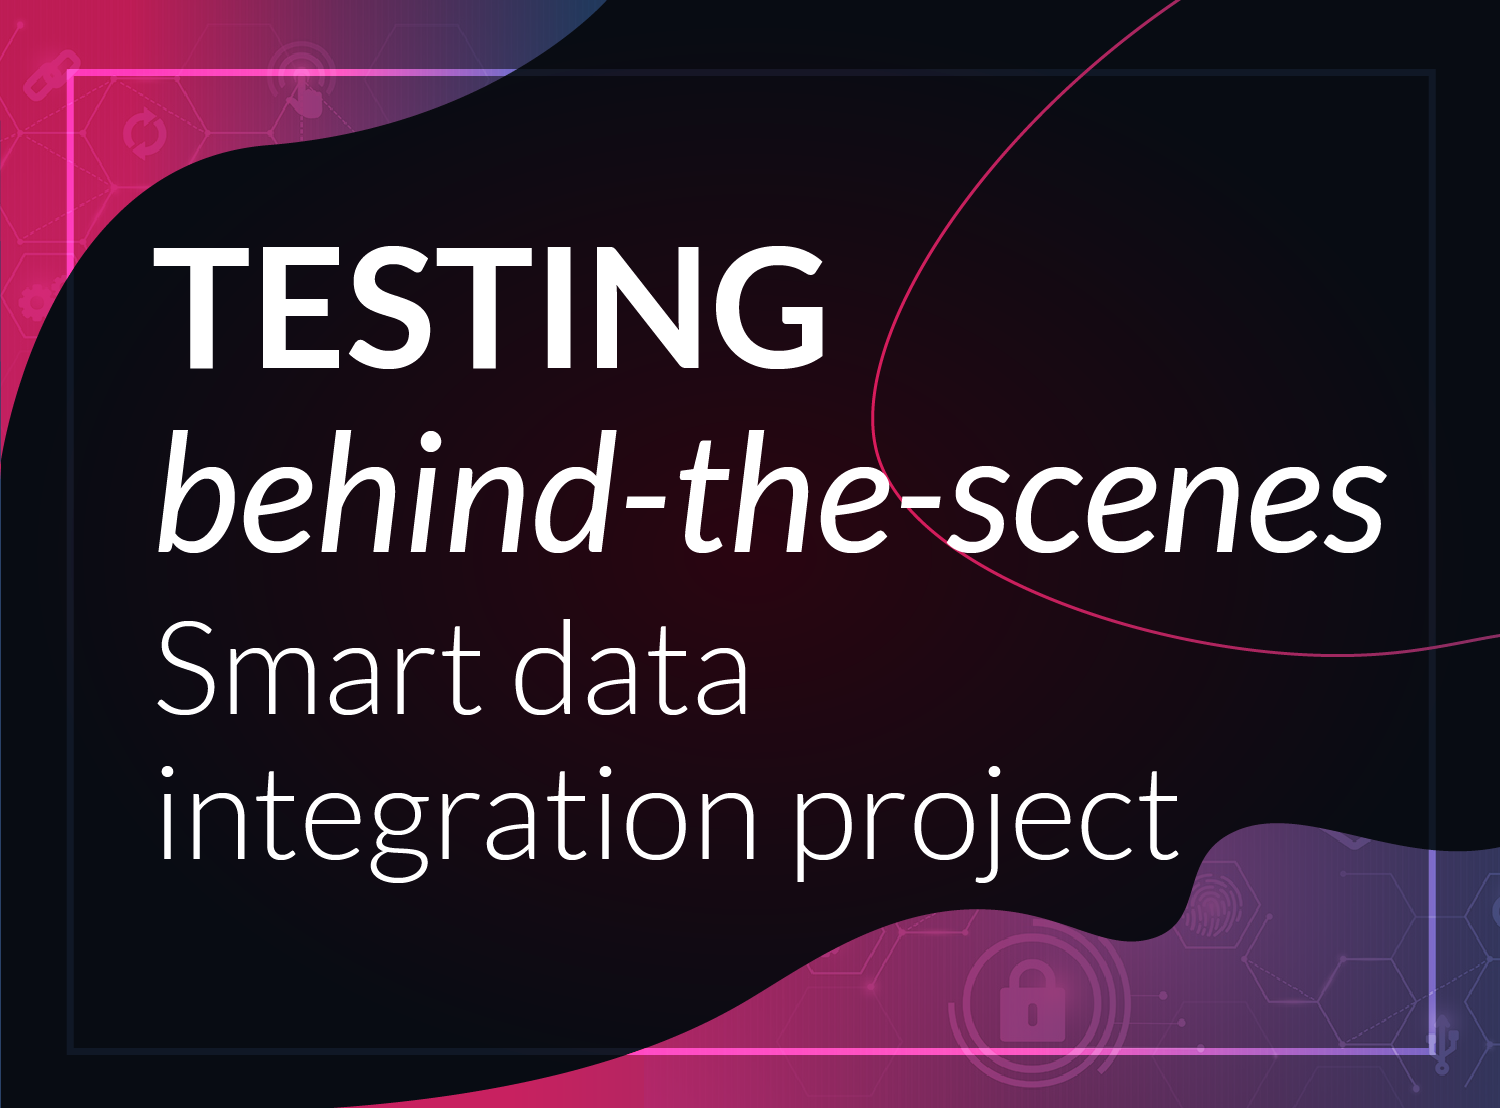 testing behind the scenes - smart data integration project